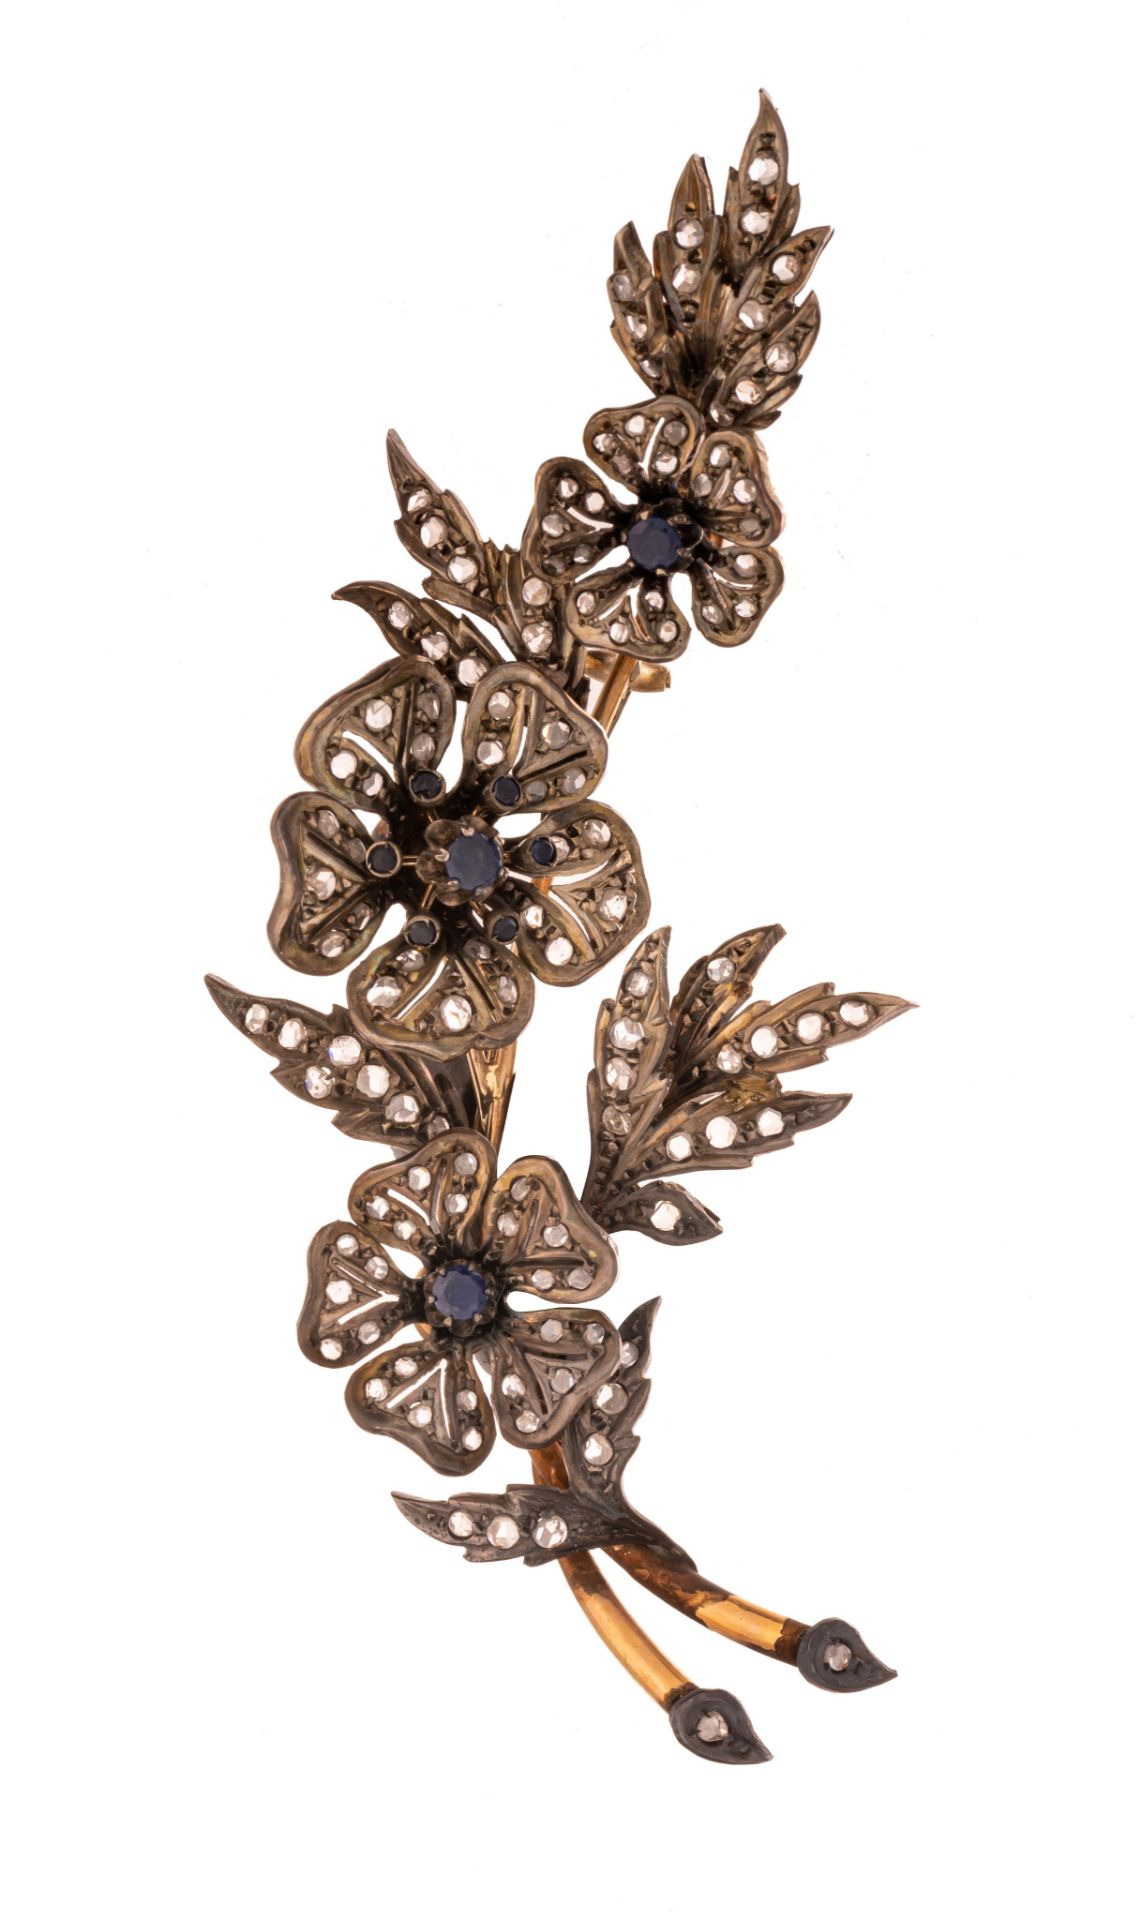 A silver and gold floral-shaped brooch, set with blue sapphires and diamonds, H 10,6 cm - 35 g